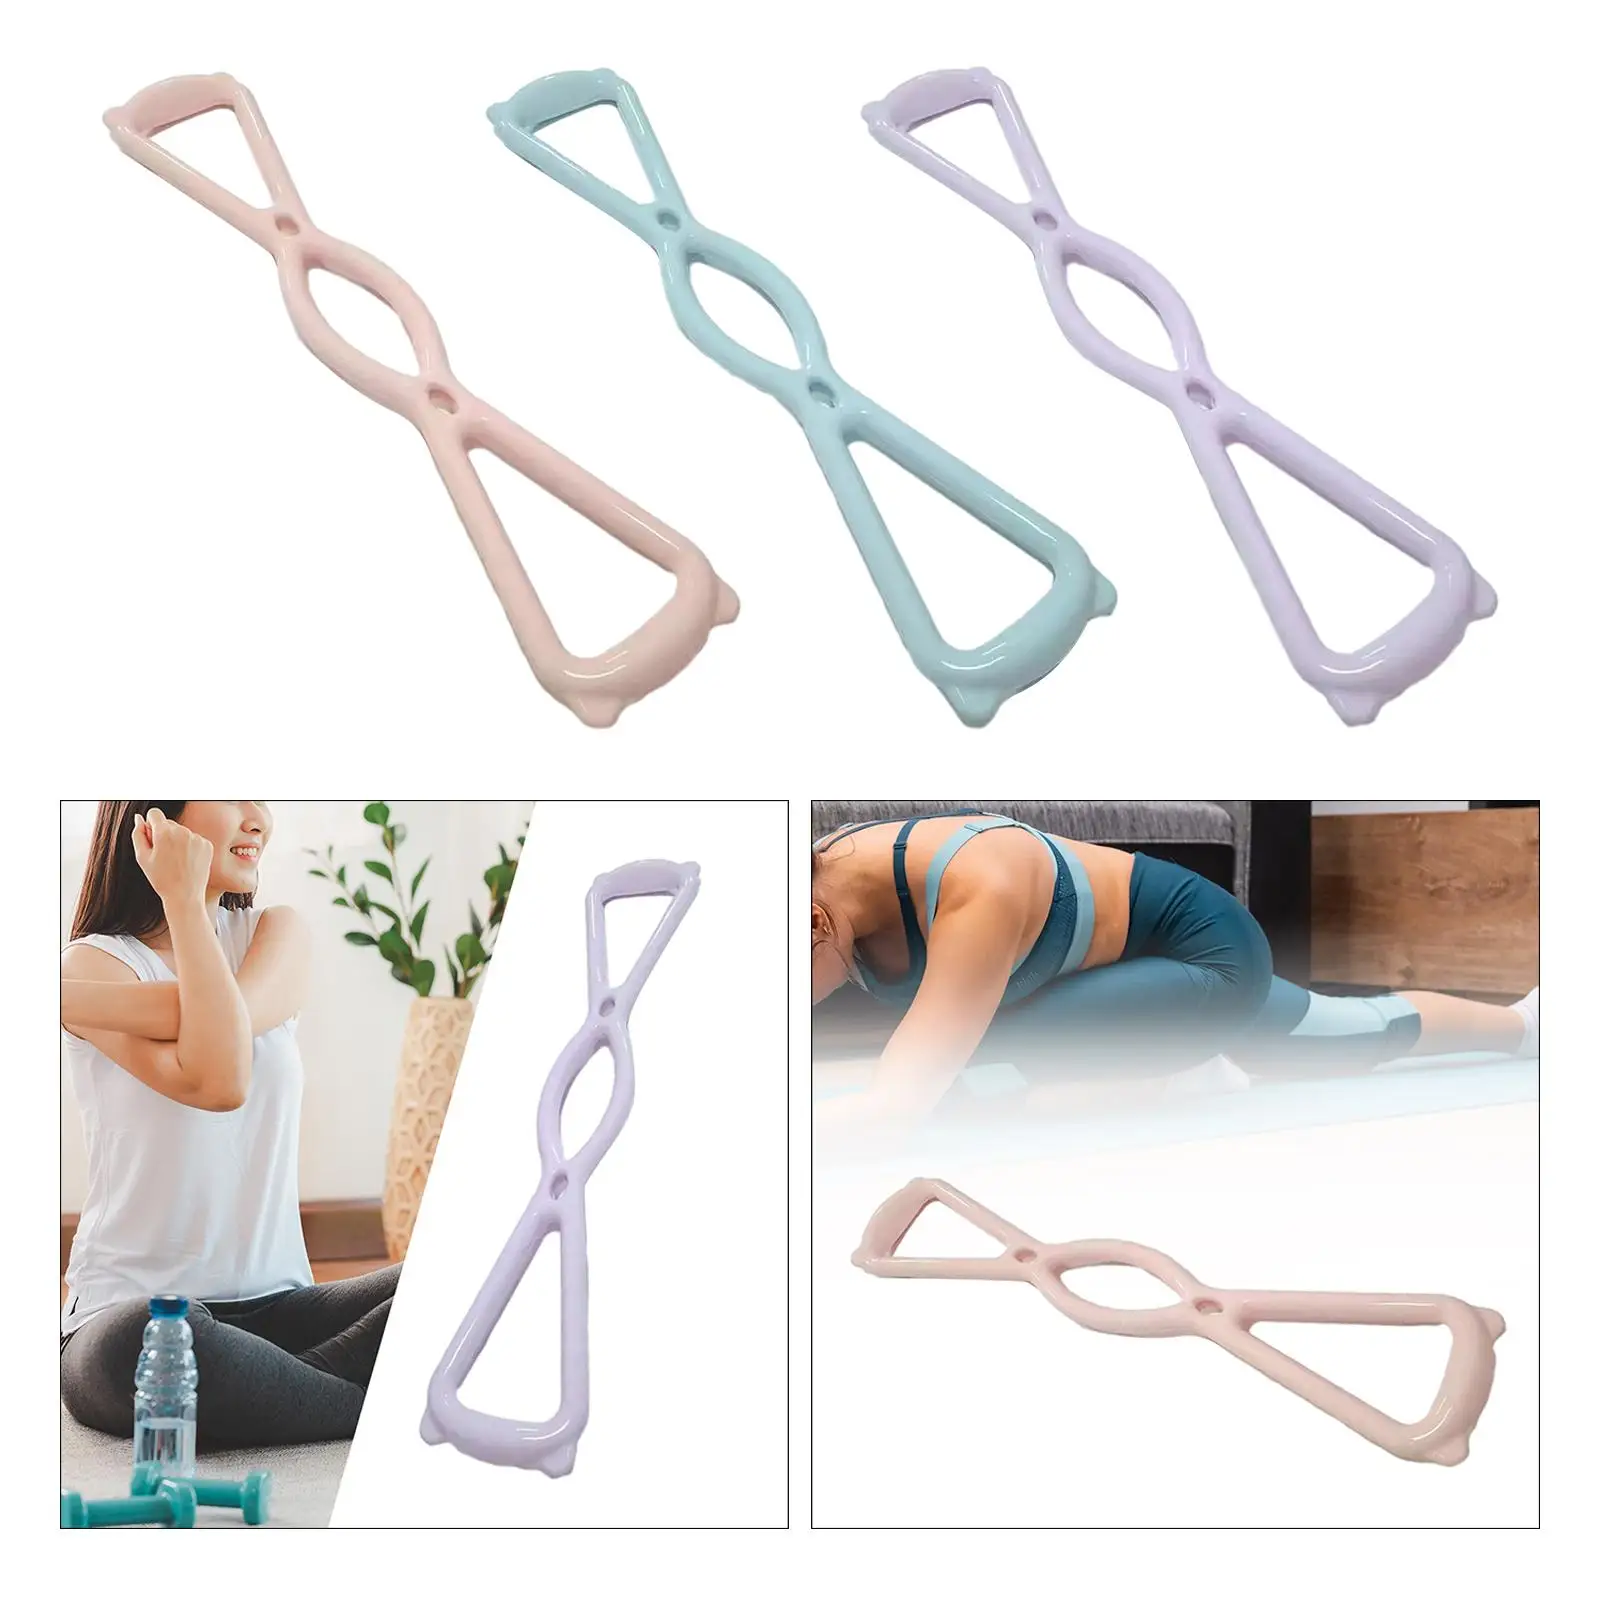 Exercise Band Workout Arms Pull up Rally Strap Pull Rope 8 Shaped Resistance Band for Exercising Yoga Women Men Pilates Fitness